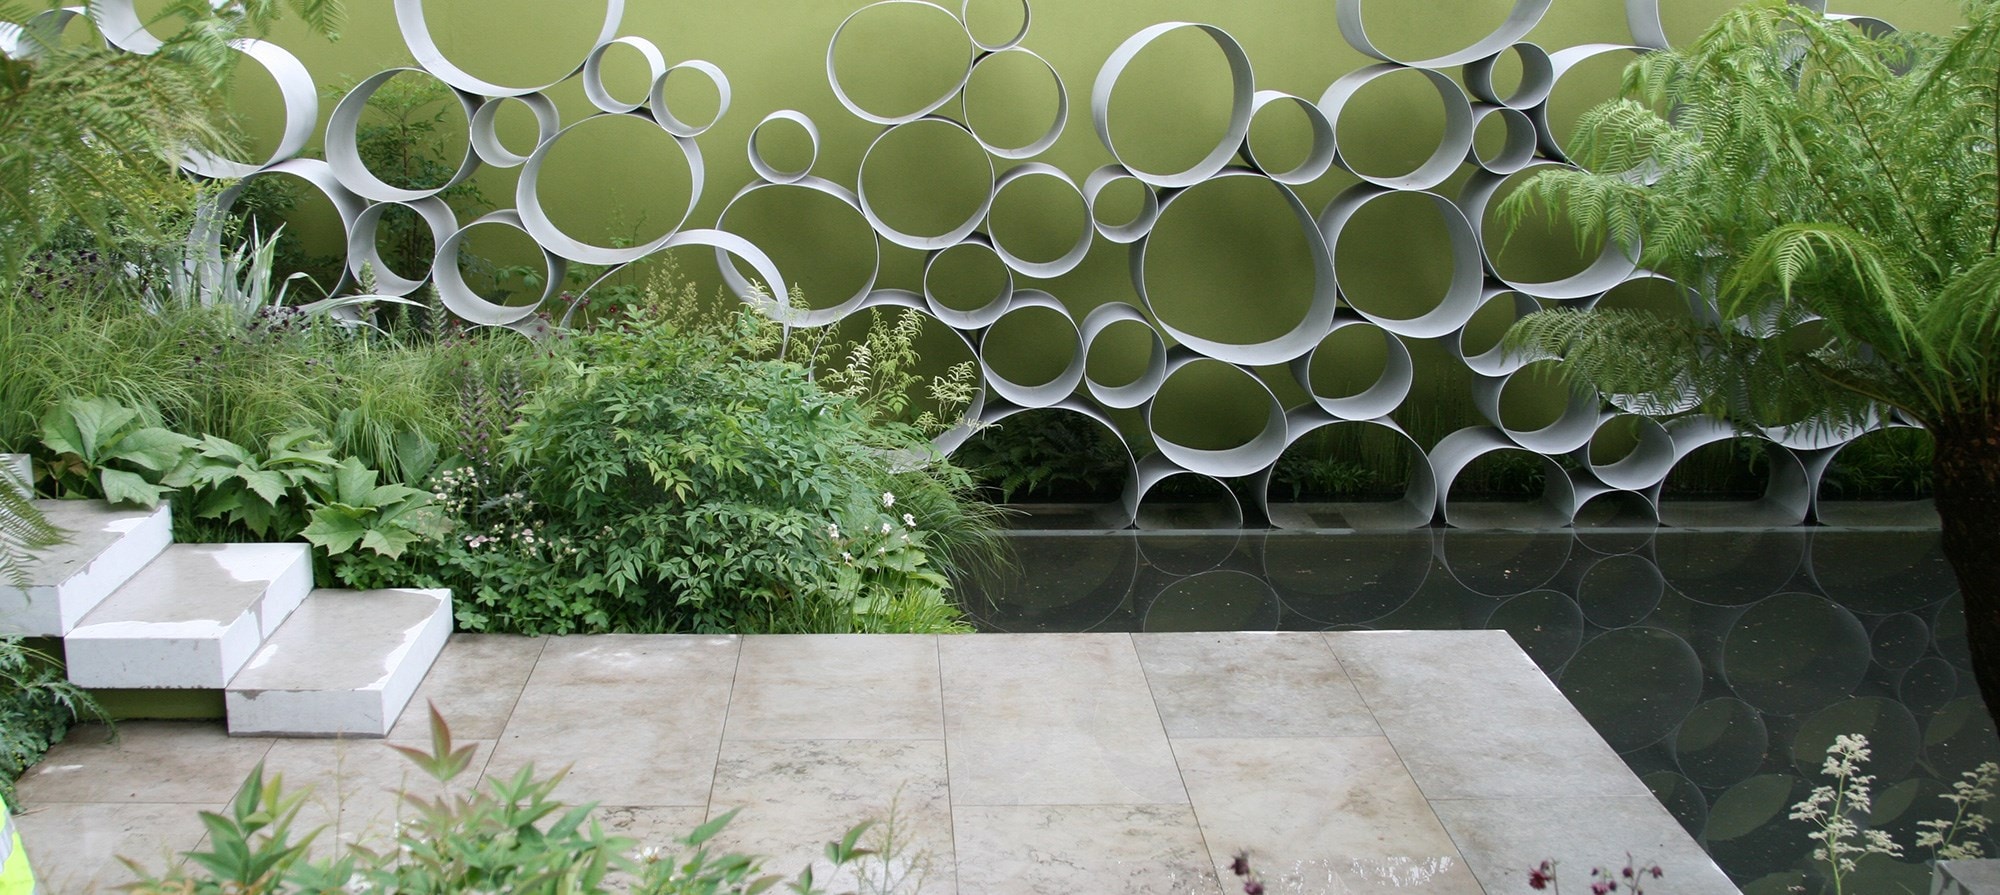 The Cancer Research UK Garden designed by Andy Sturgeon